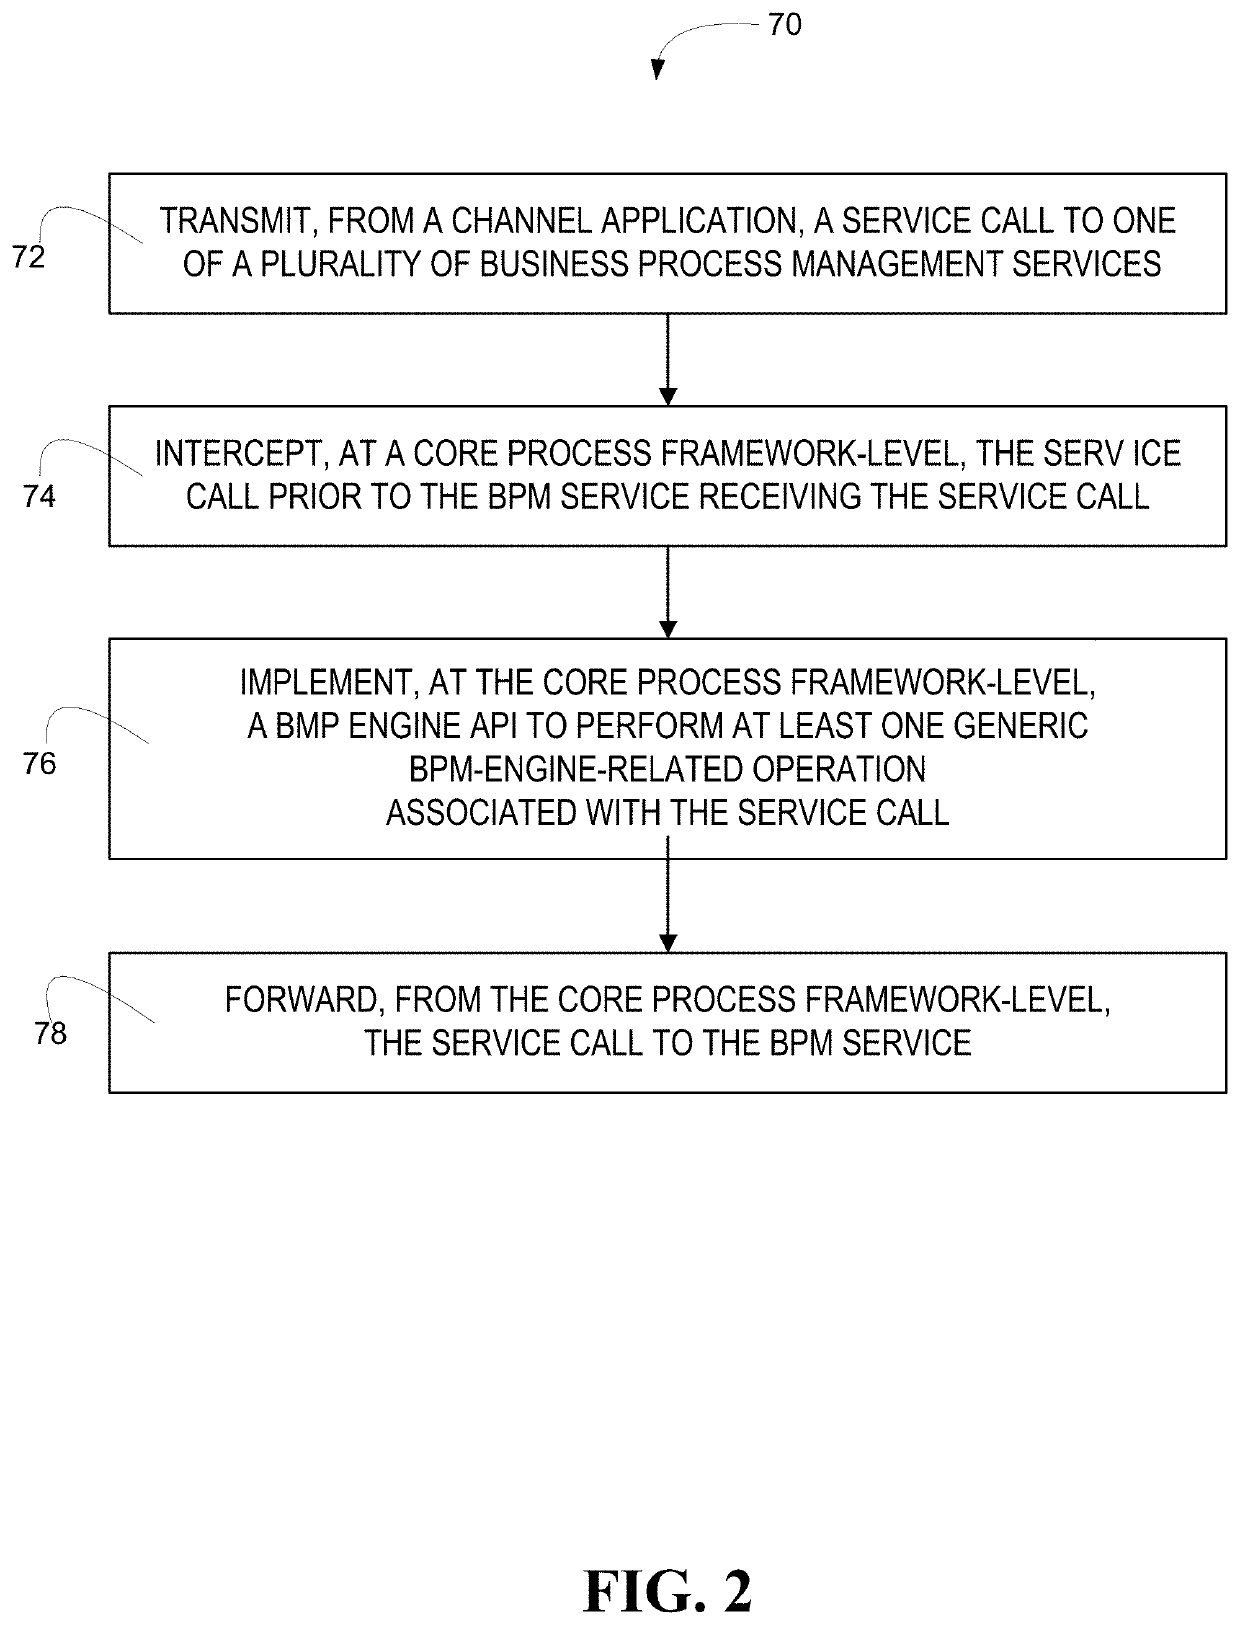 Core process framework for integrating disparate applications